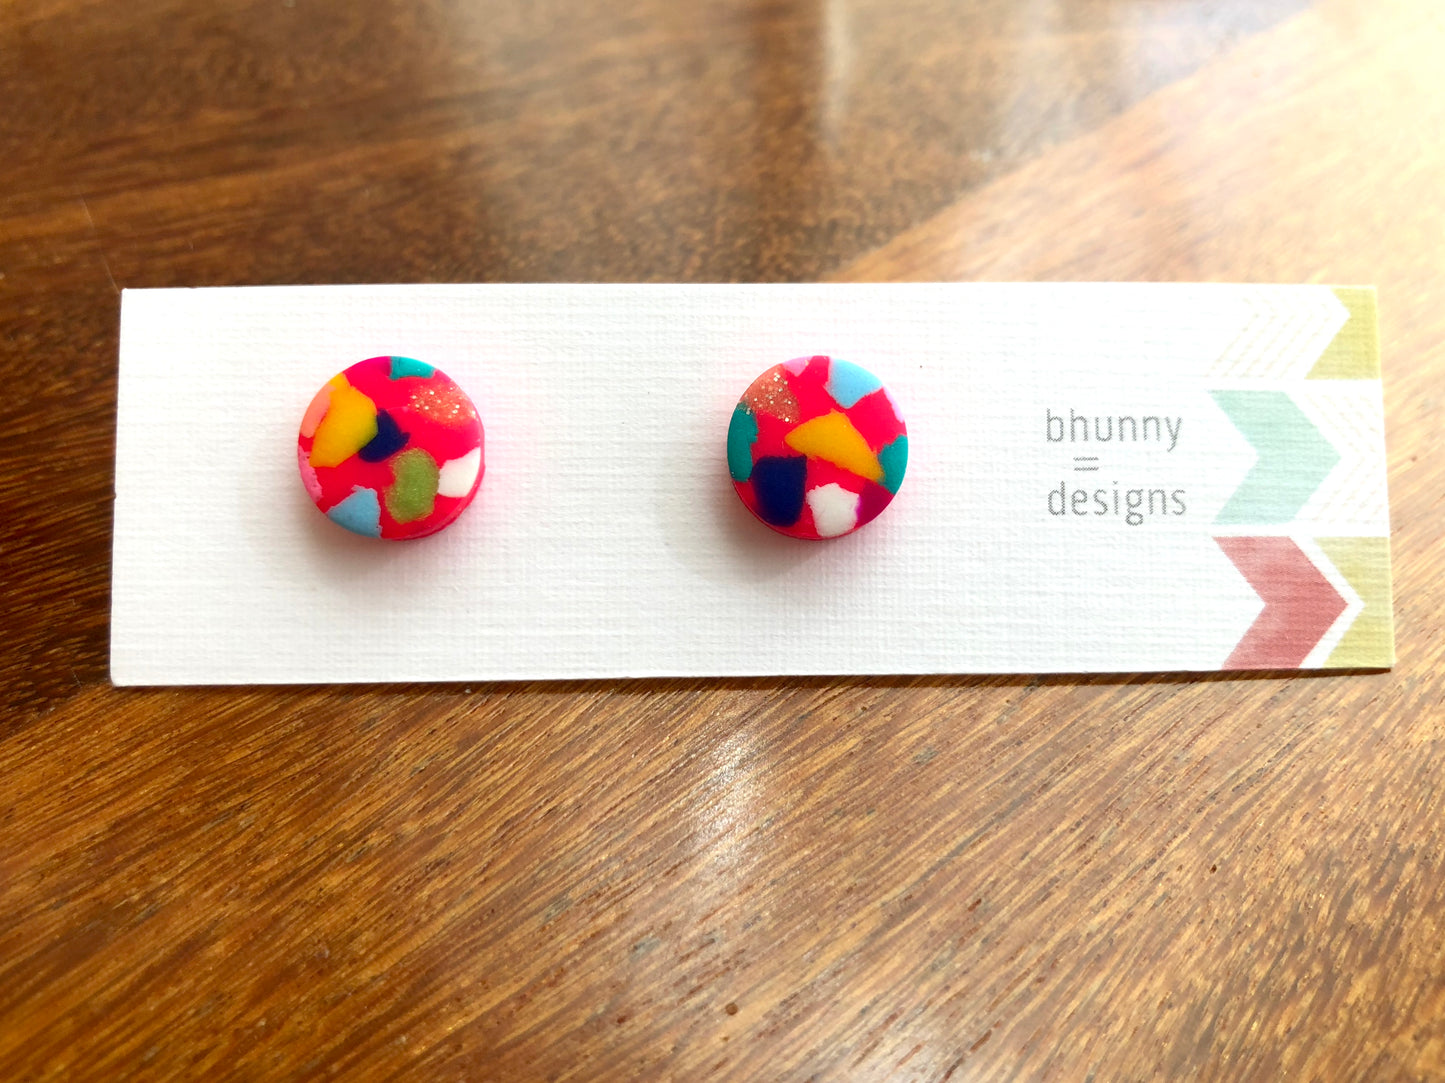 Load image into Gallery viewer, EARRINGS | Bhunny Designs Earrings
